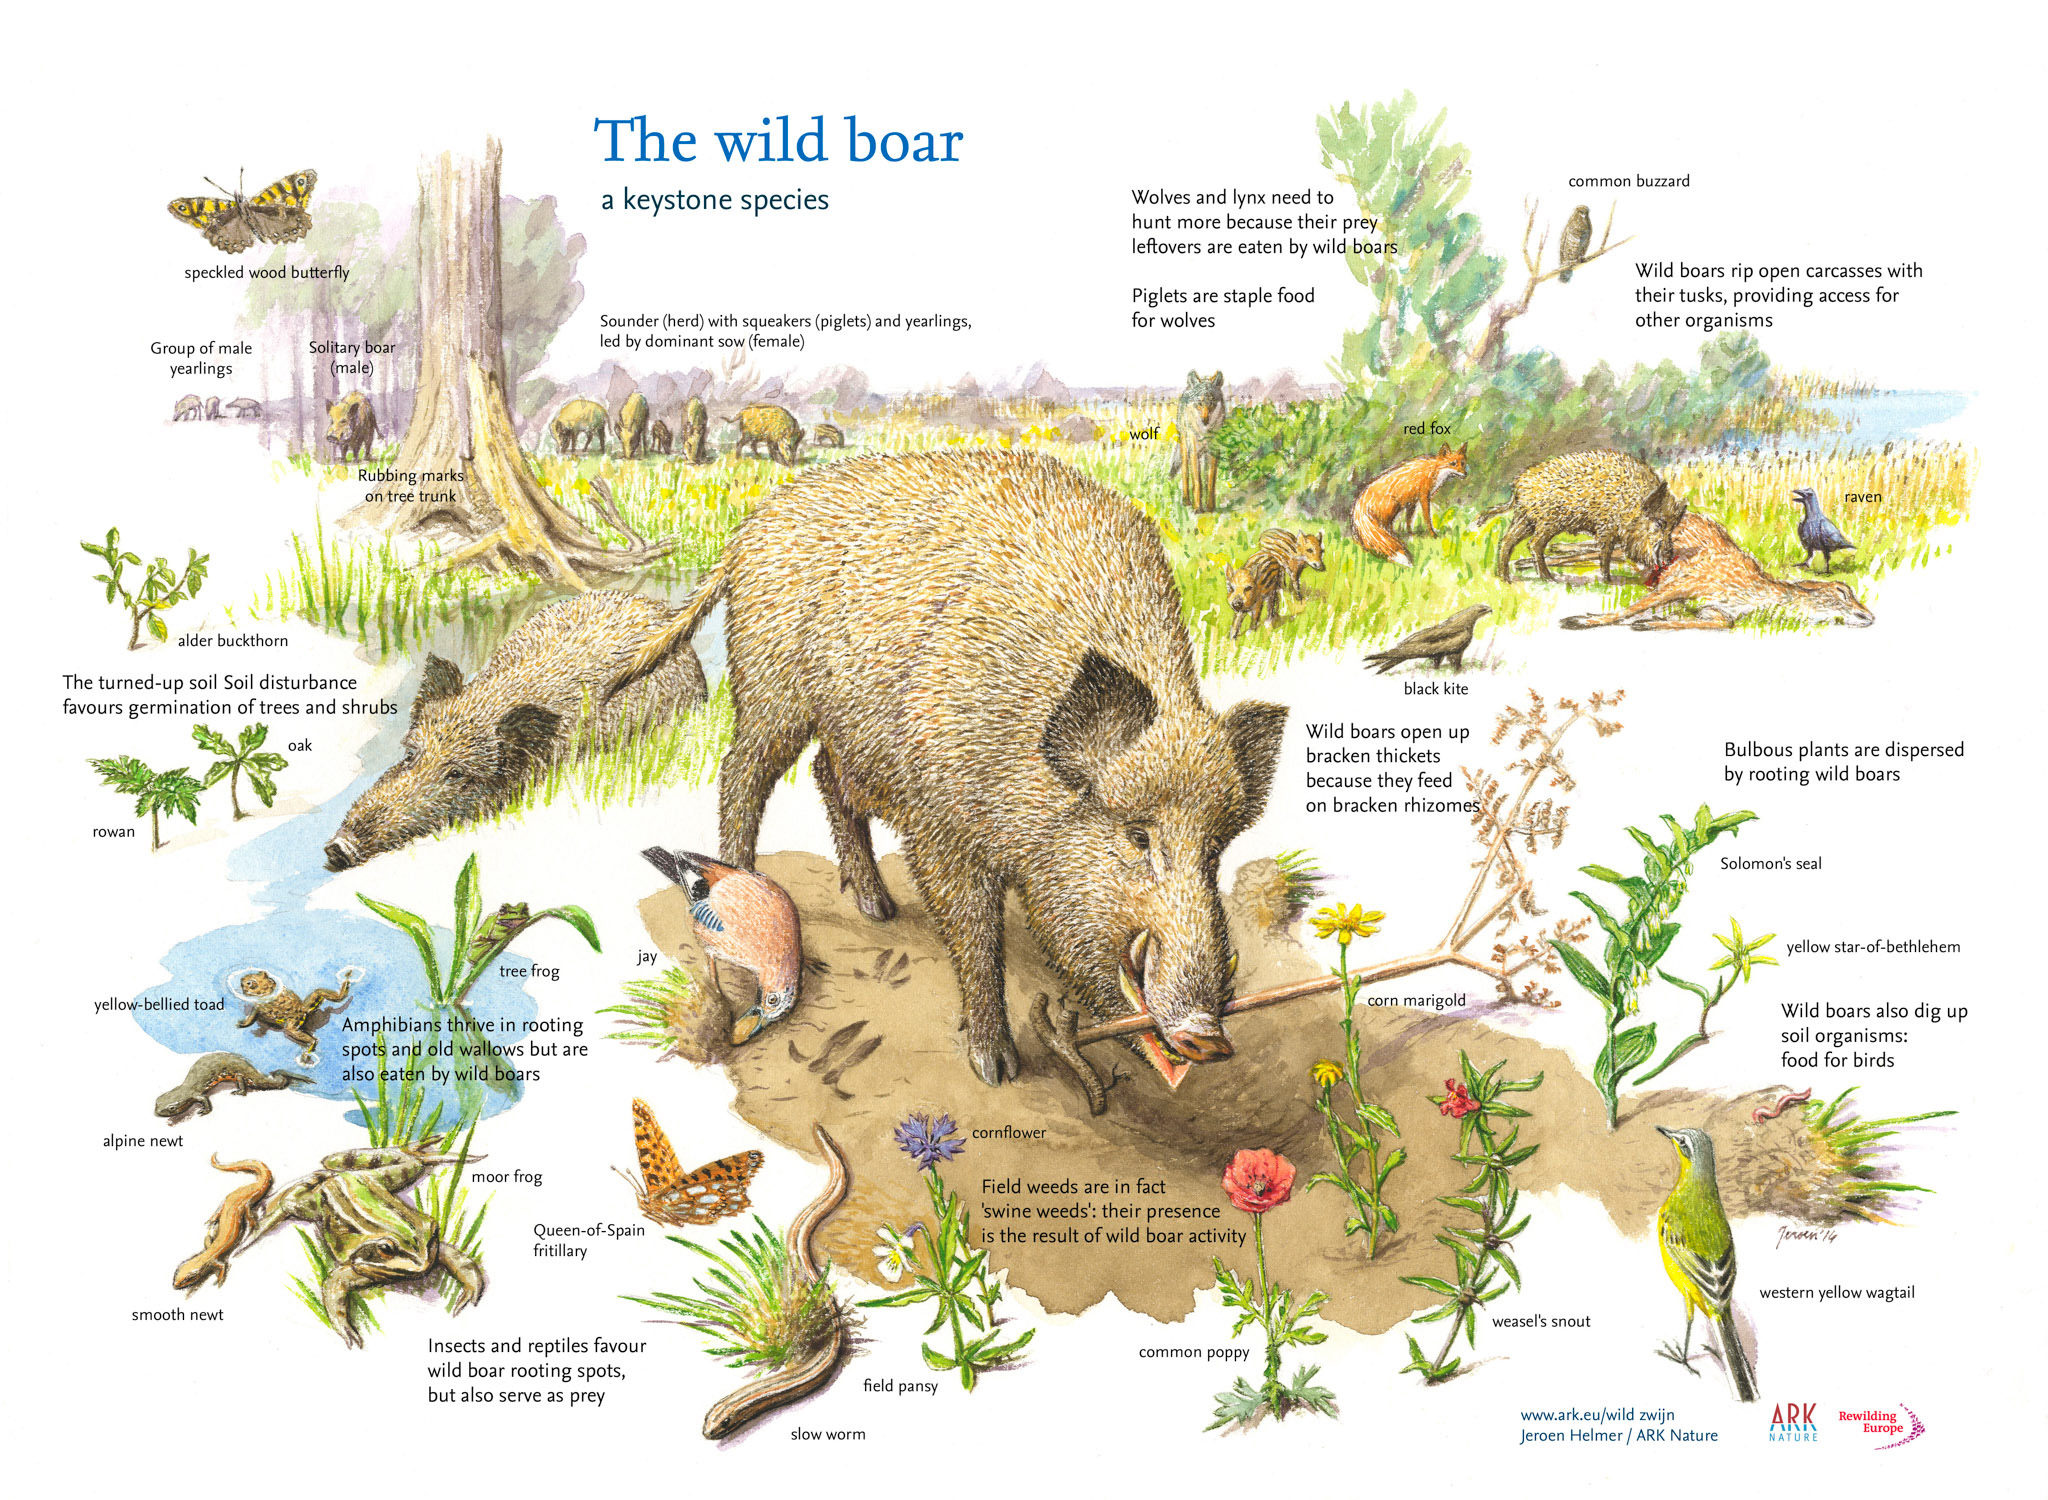 A vision of hope: Rewilding with keystone species and how animals are able to save ecosystems by Jeroen Helmer - The Wild Boar 